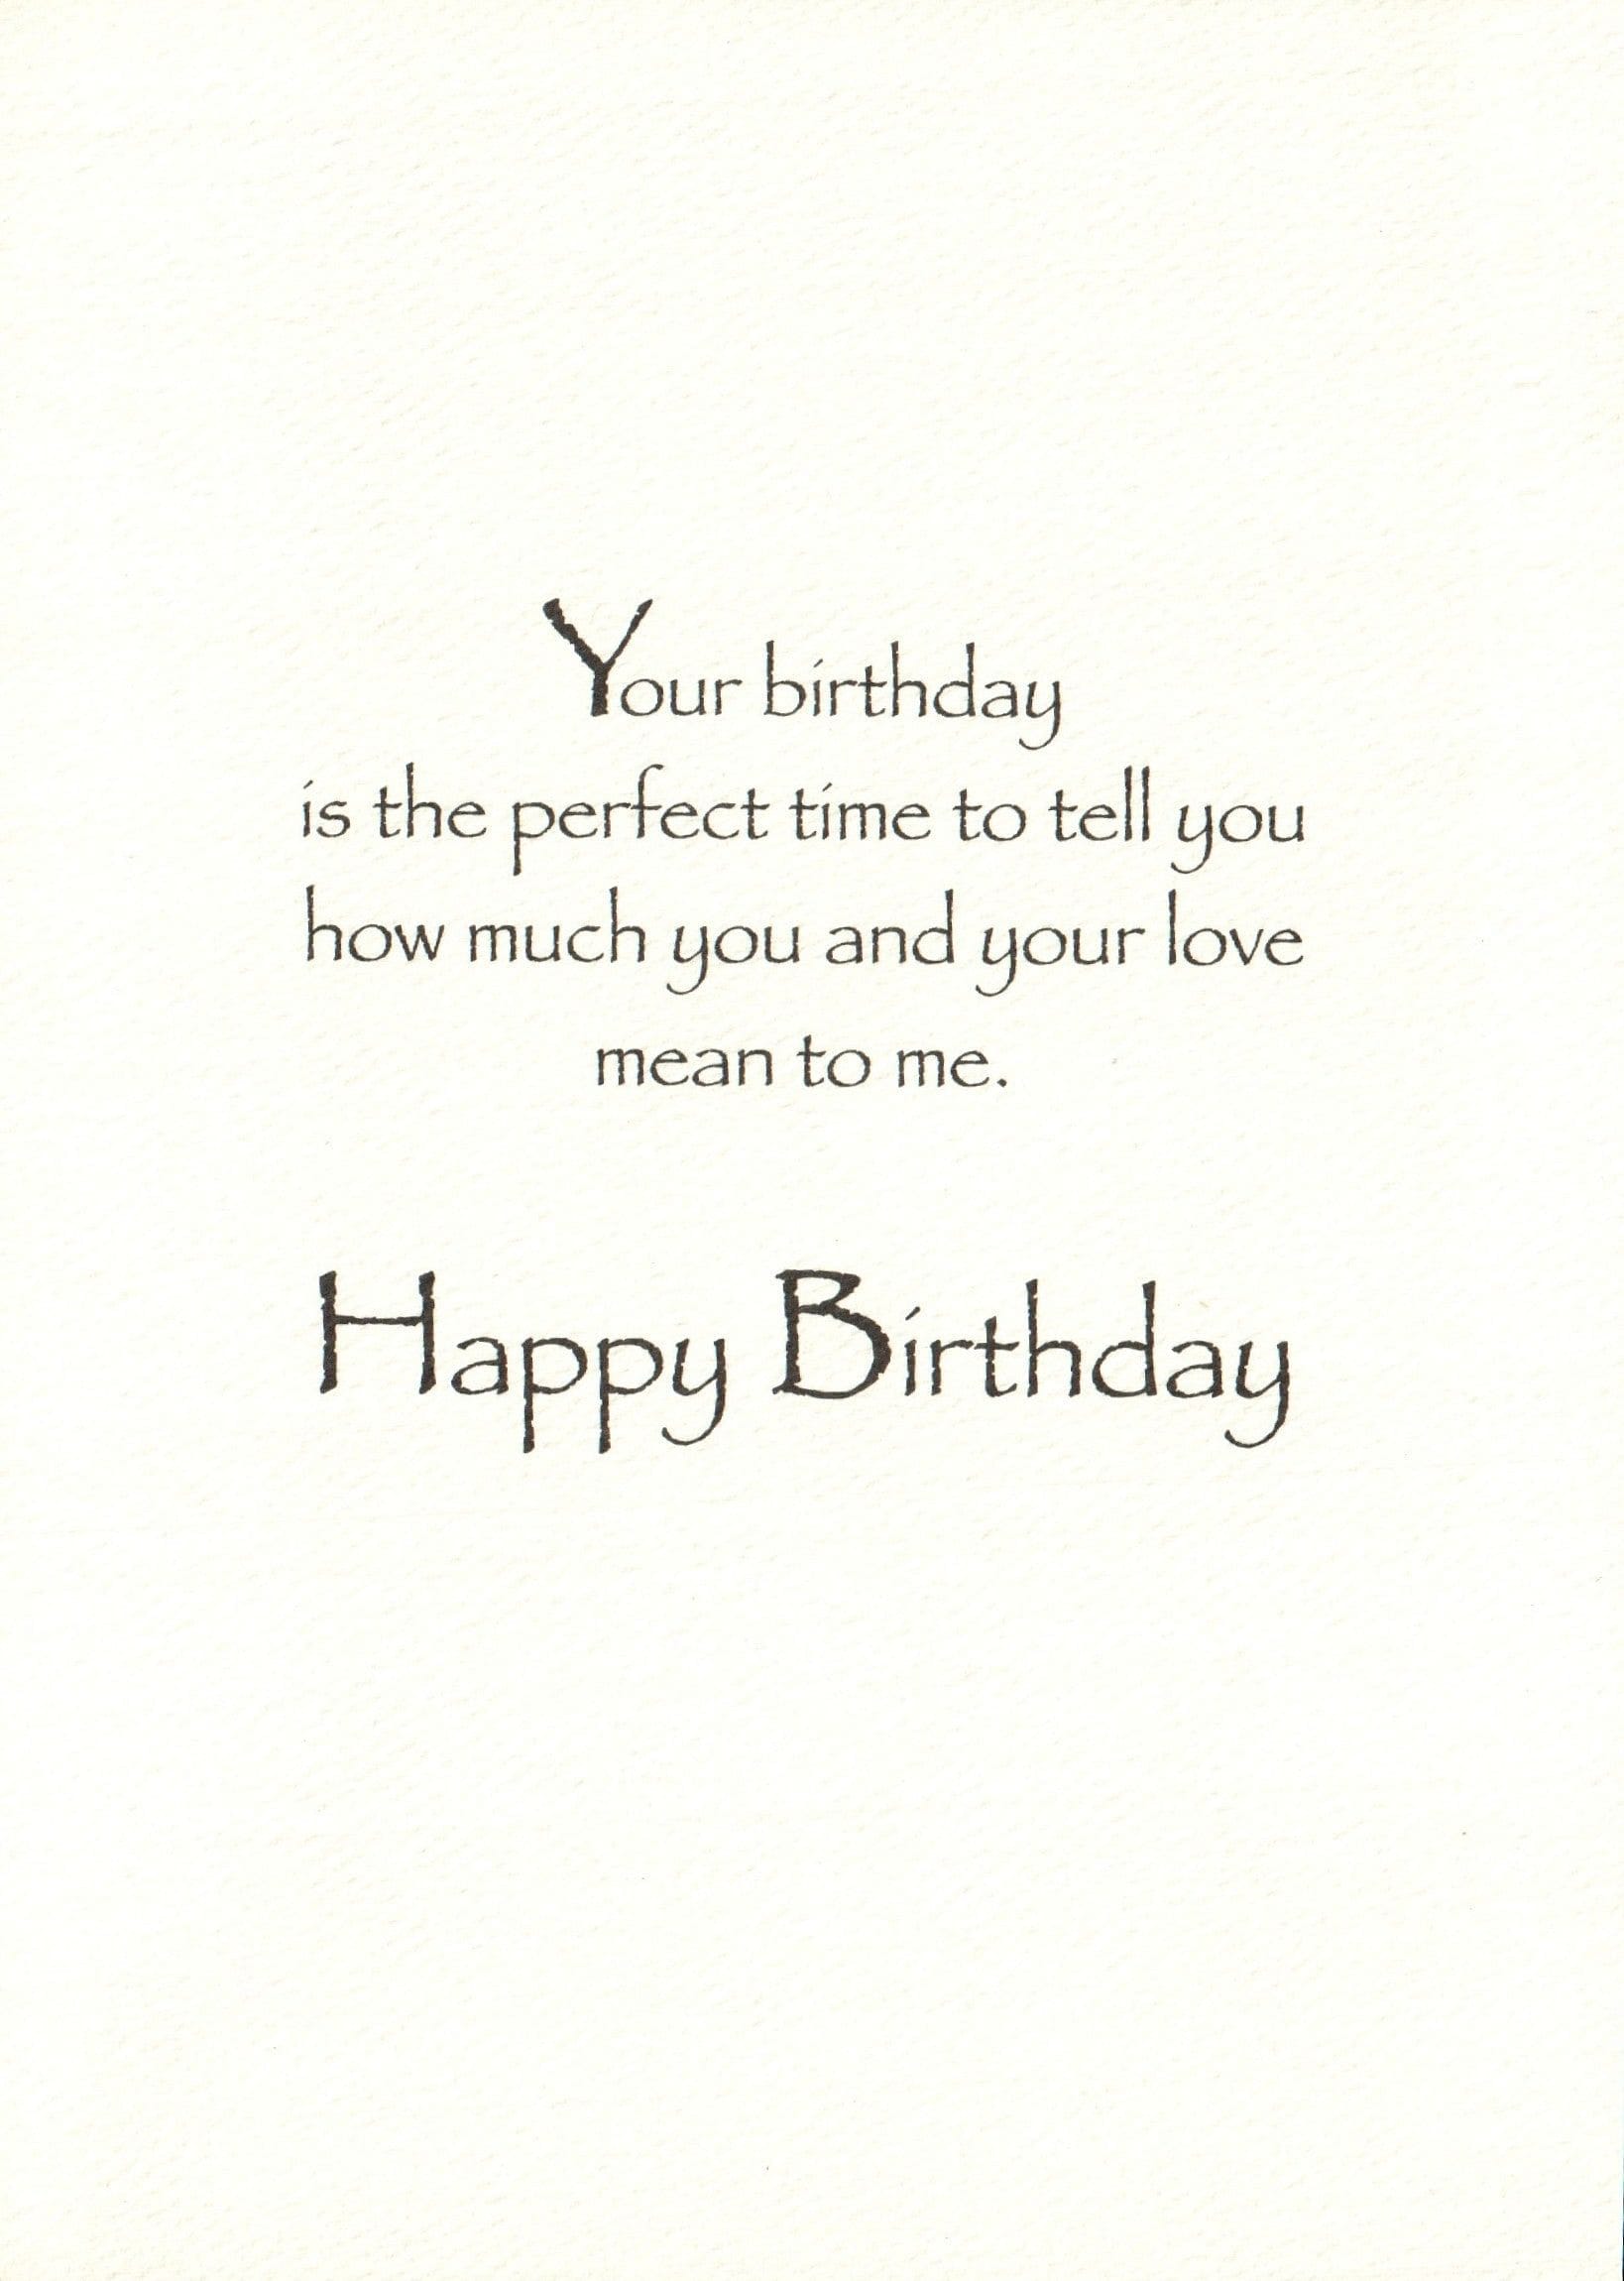 Birthday Card - A Loving Message For My Husband - Shelburne Country Store